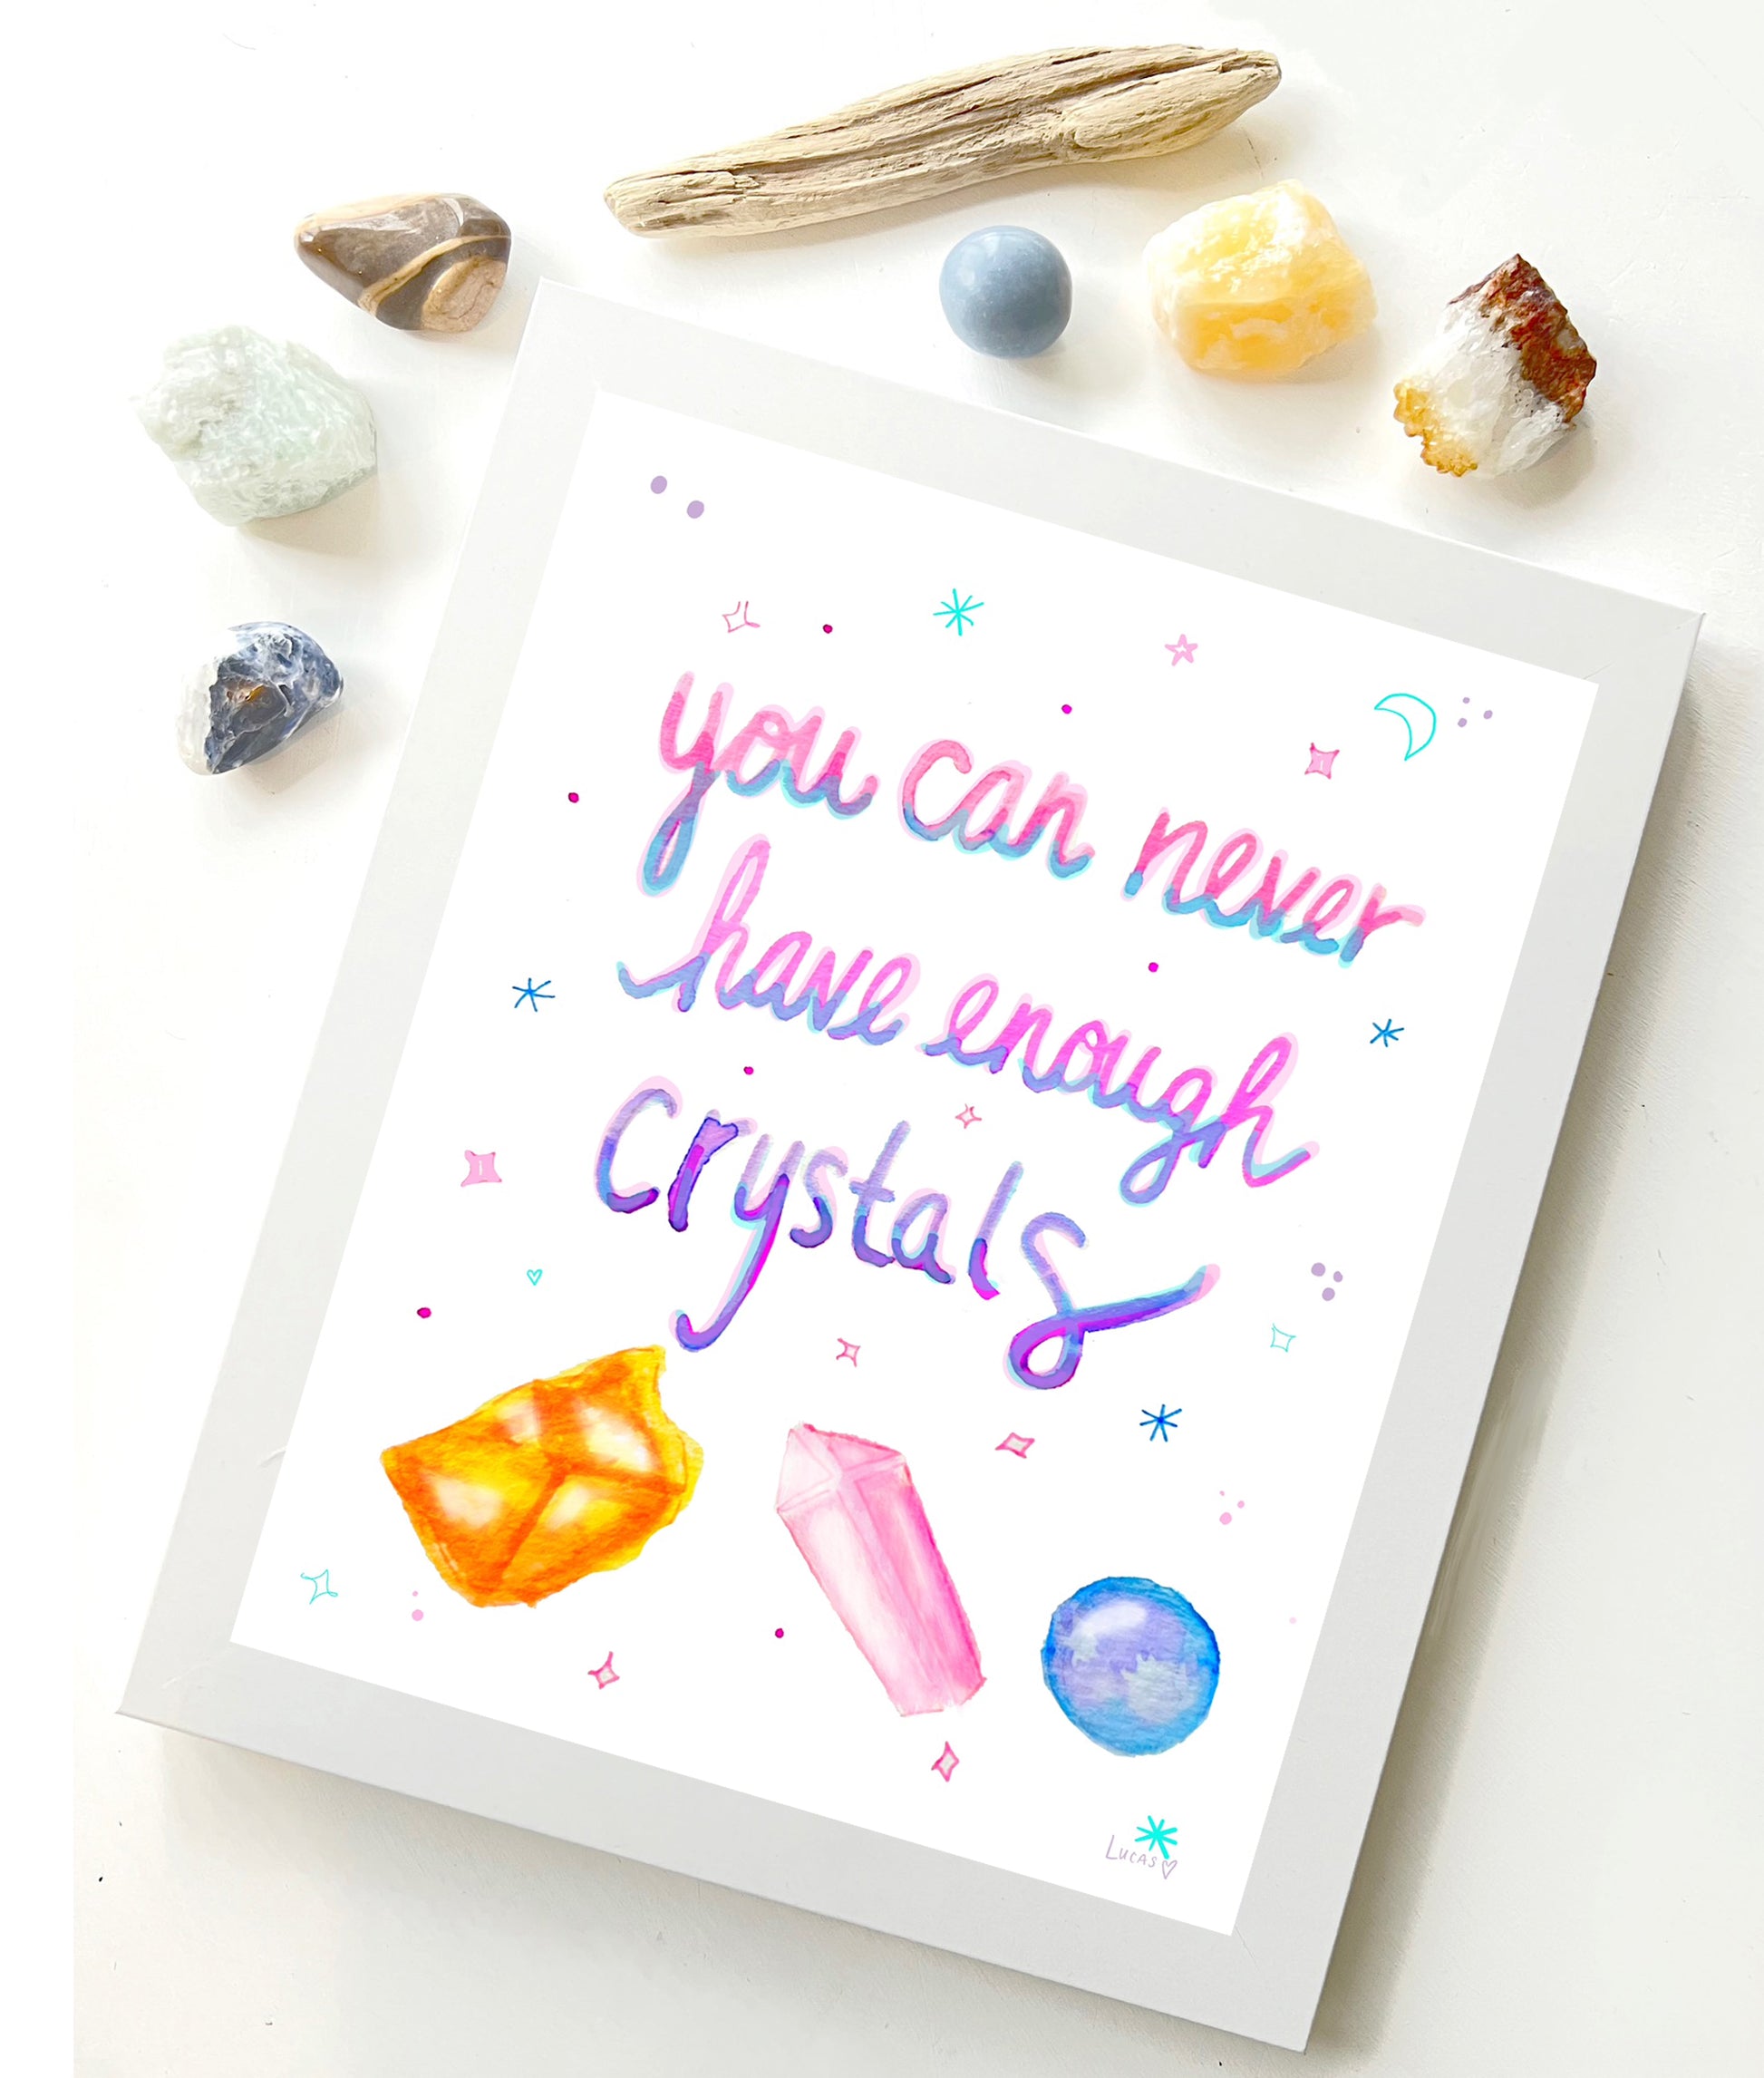 You Can Never Have Enough Crystals 8"x10" Wall Art